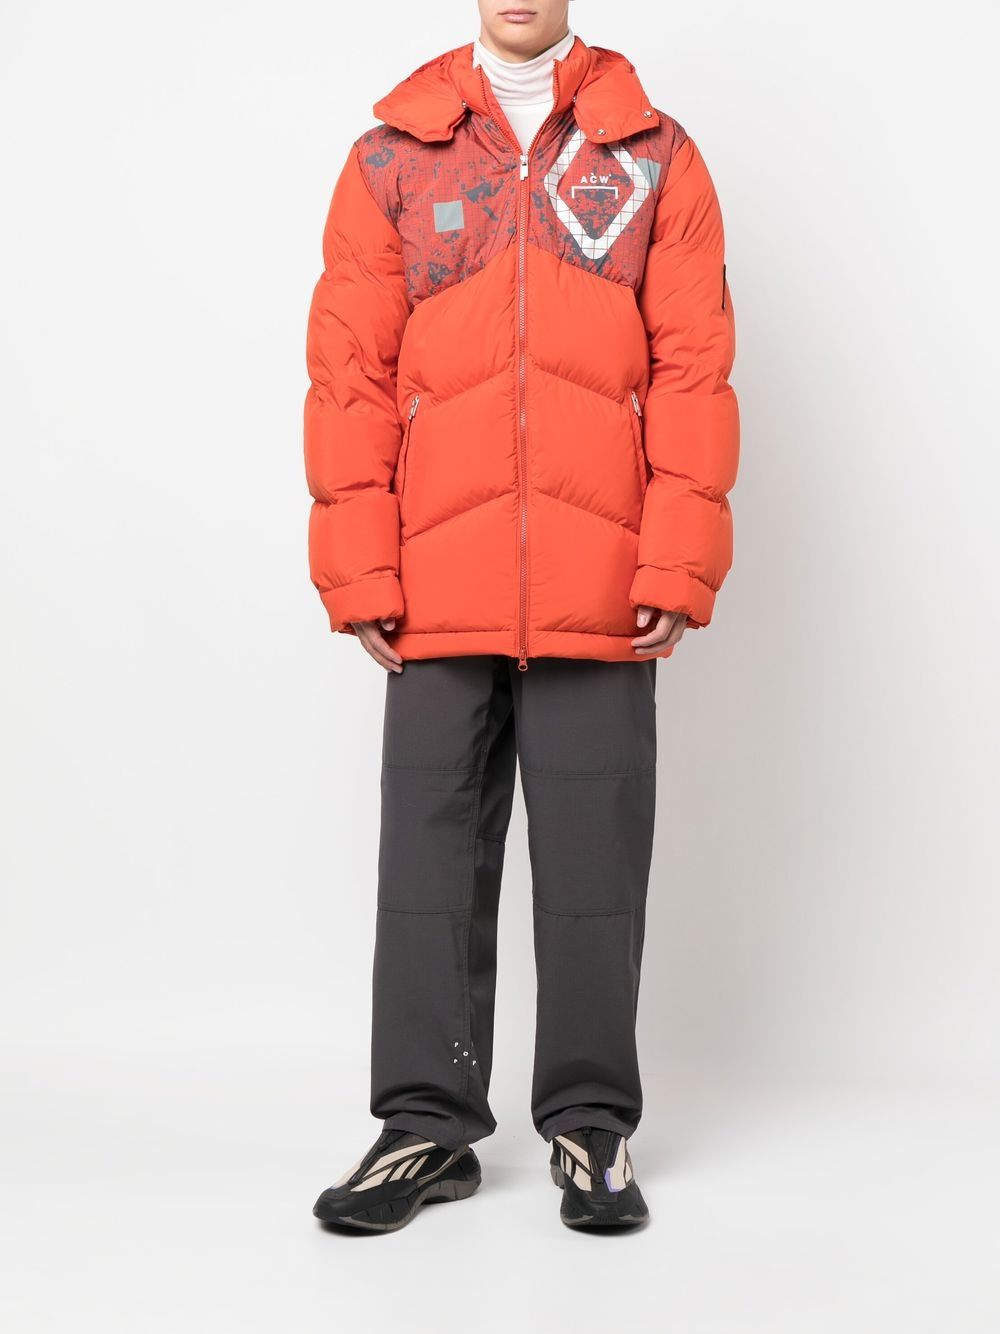 A-COLD-WALL* Hooded Padded - Farfetch